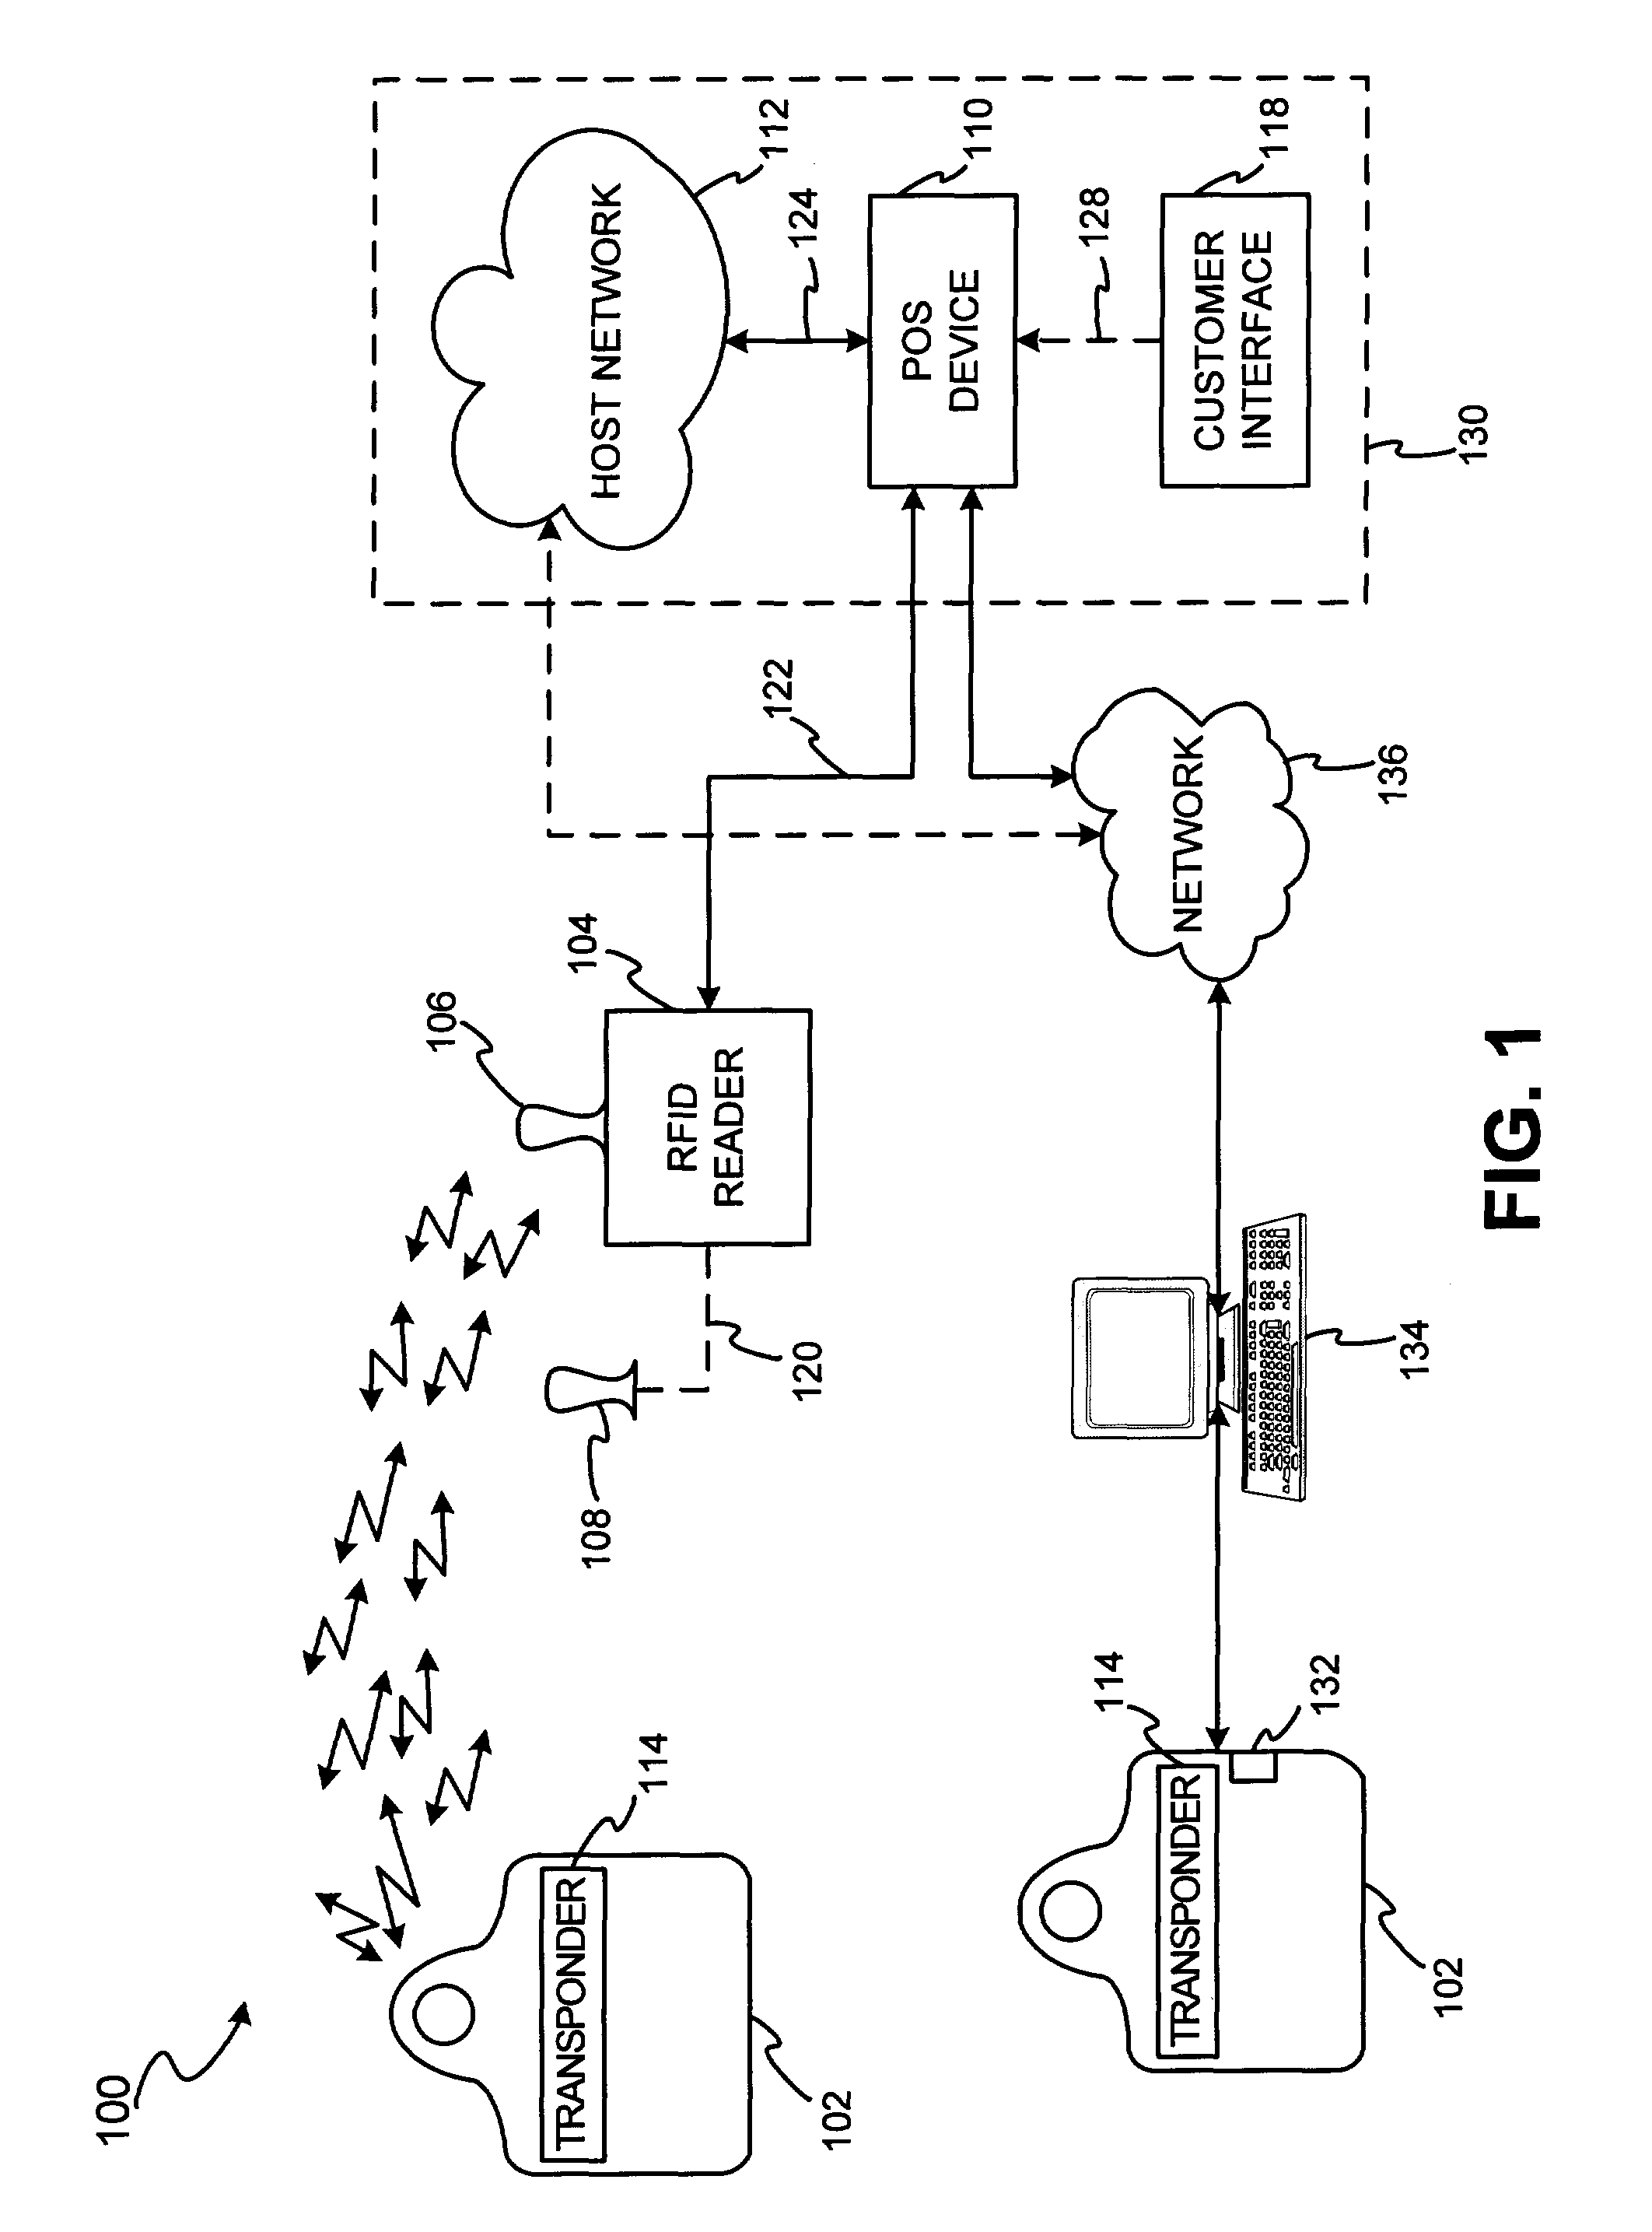 System and method for dynamic fob synchronization and personalization